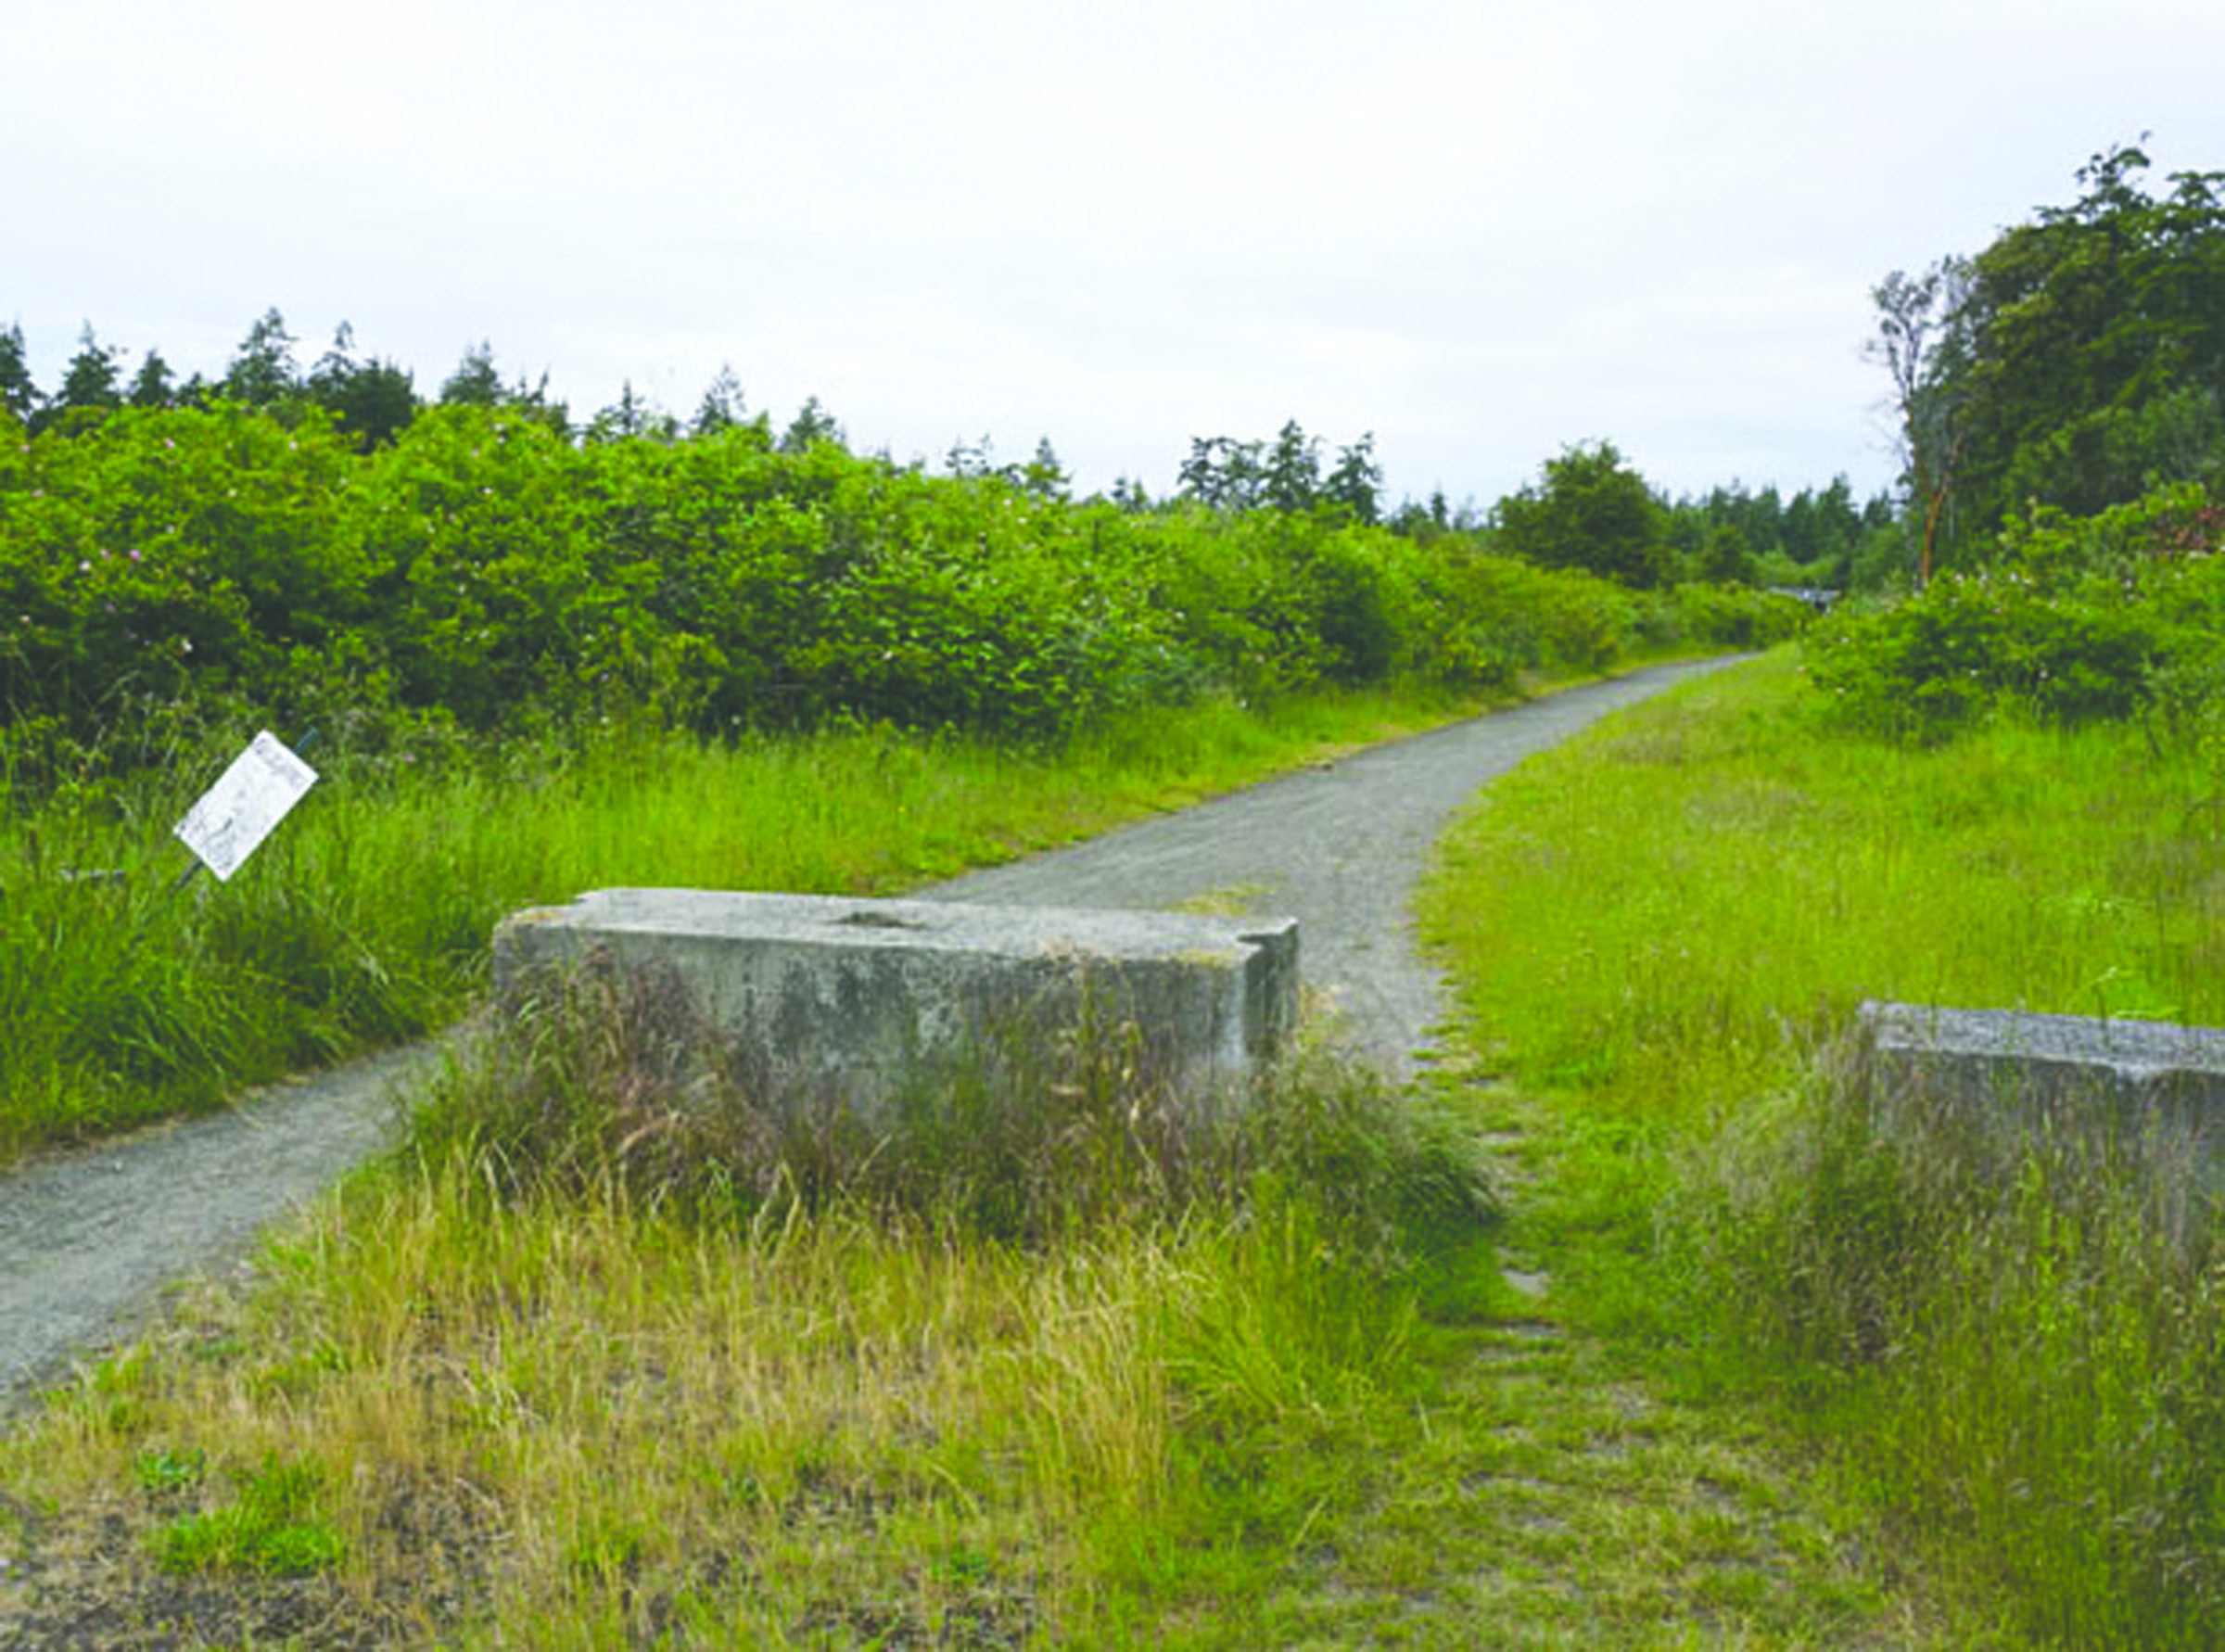 This path will become a road leading to a roundabout on Discovery Road in Port Townsend after its expected completion next spring. (Charlie Bermant/Peninsula Daily News)